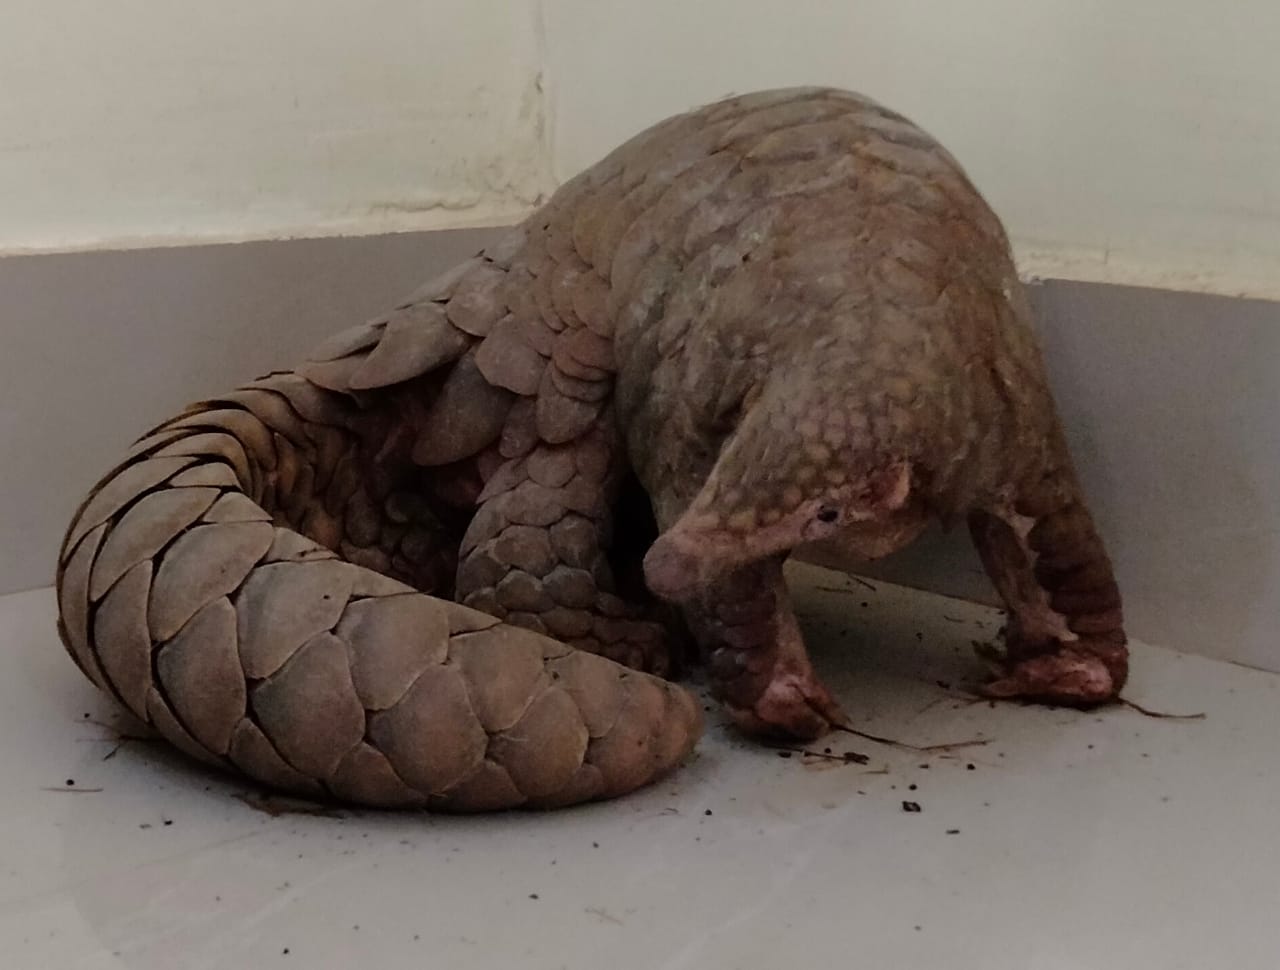 Live pangolin rescued